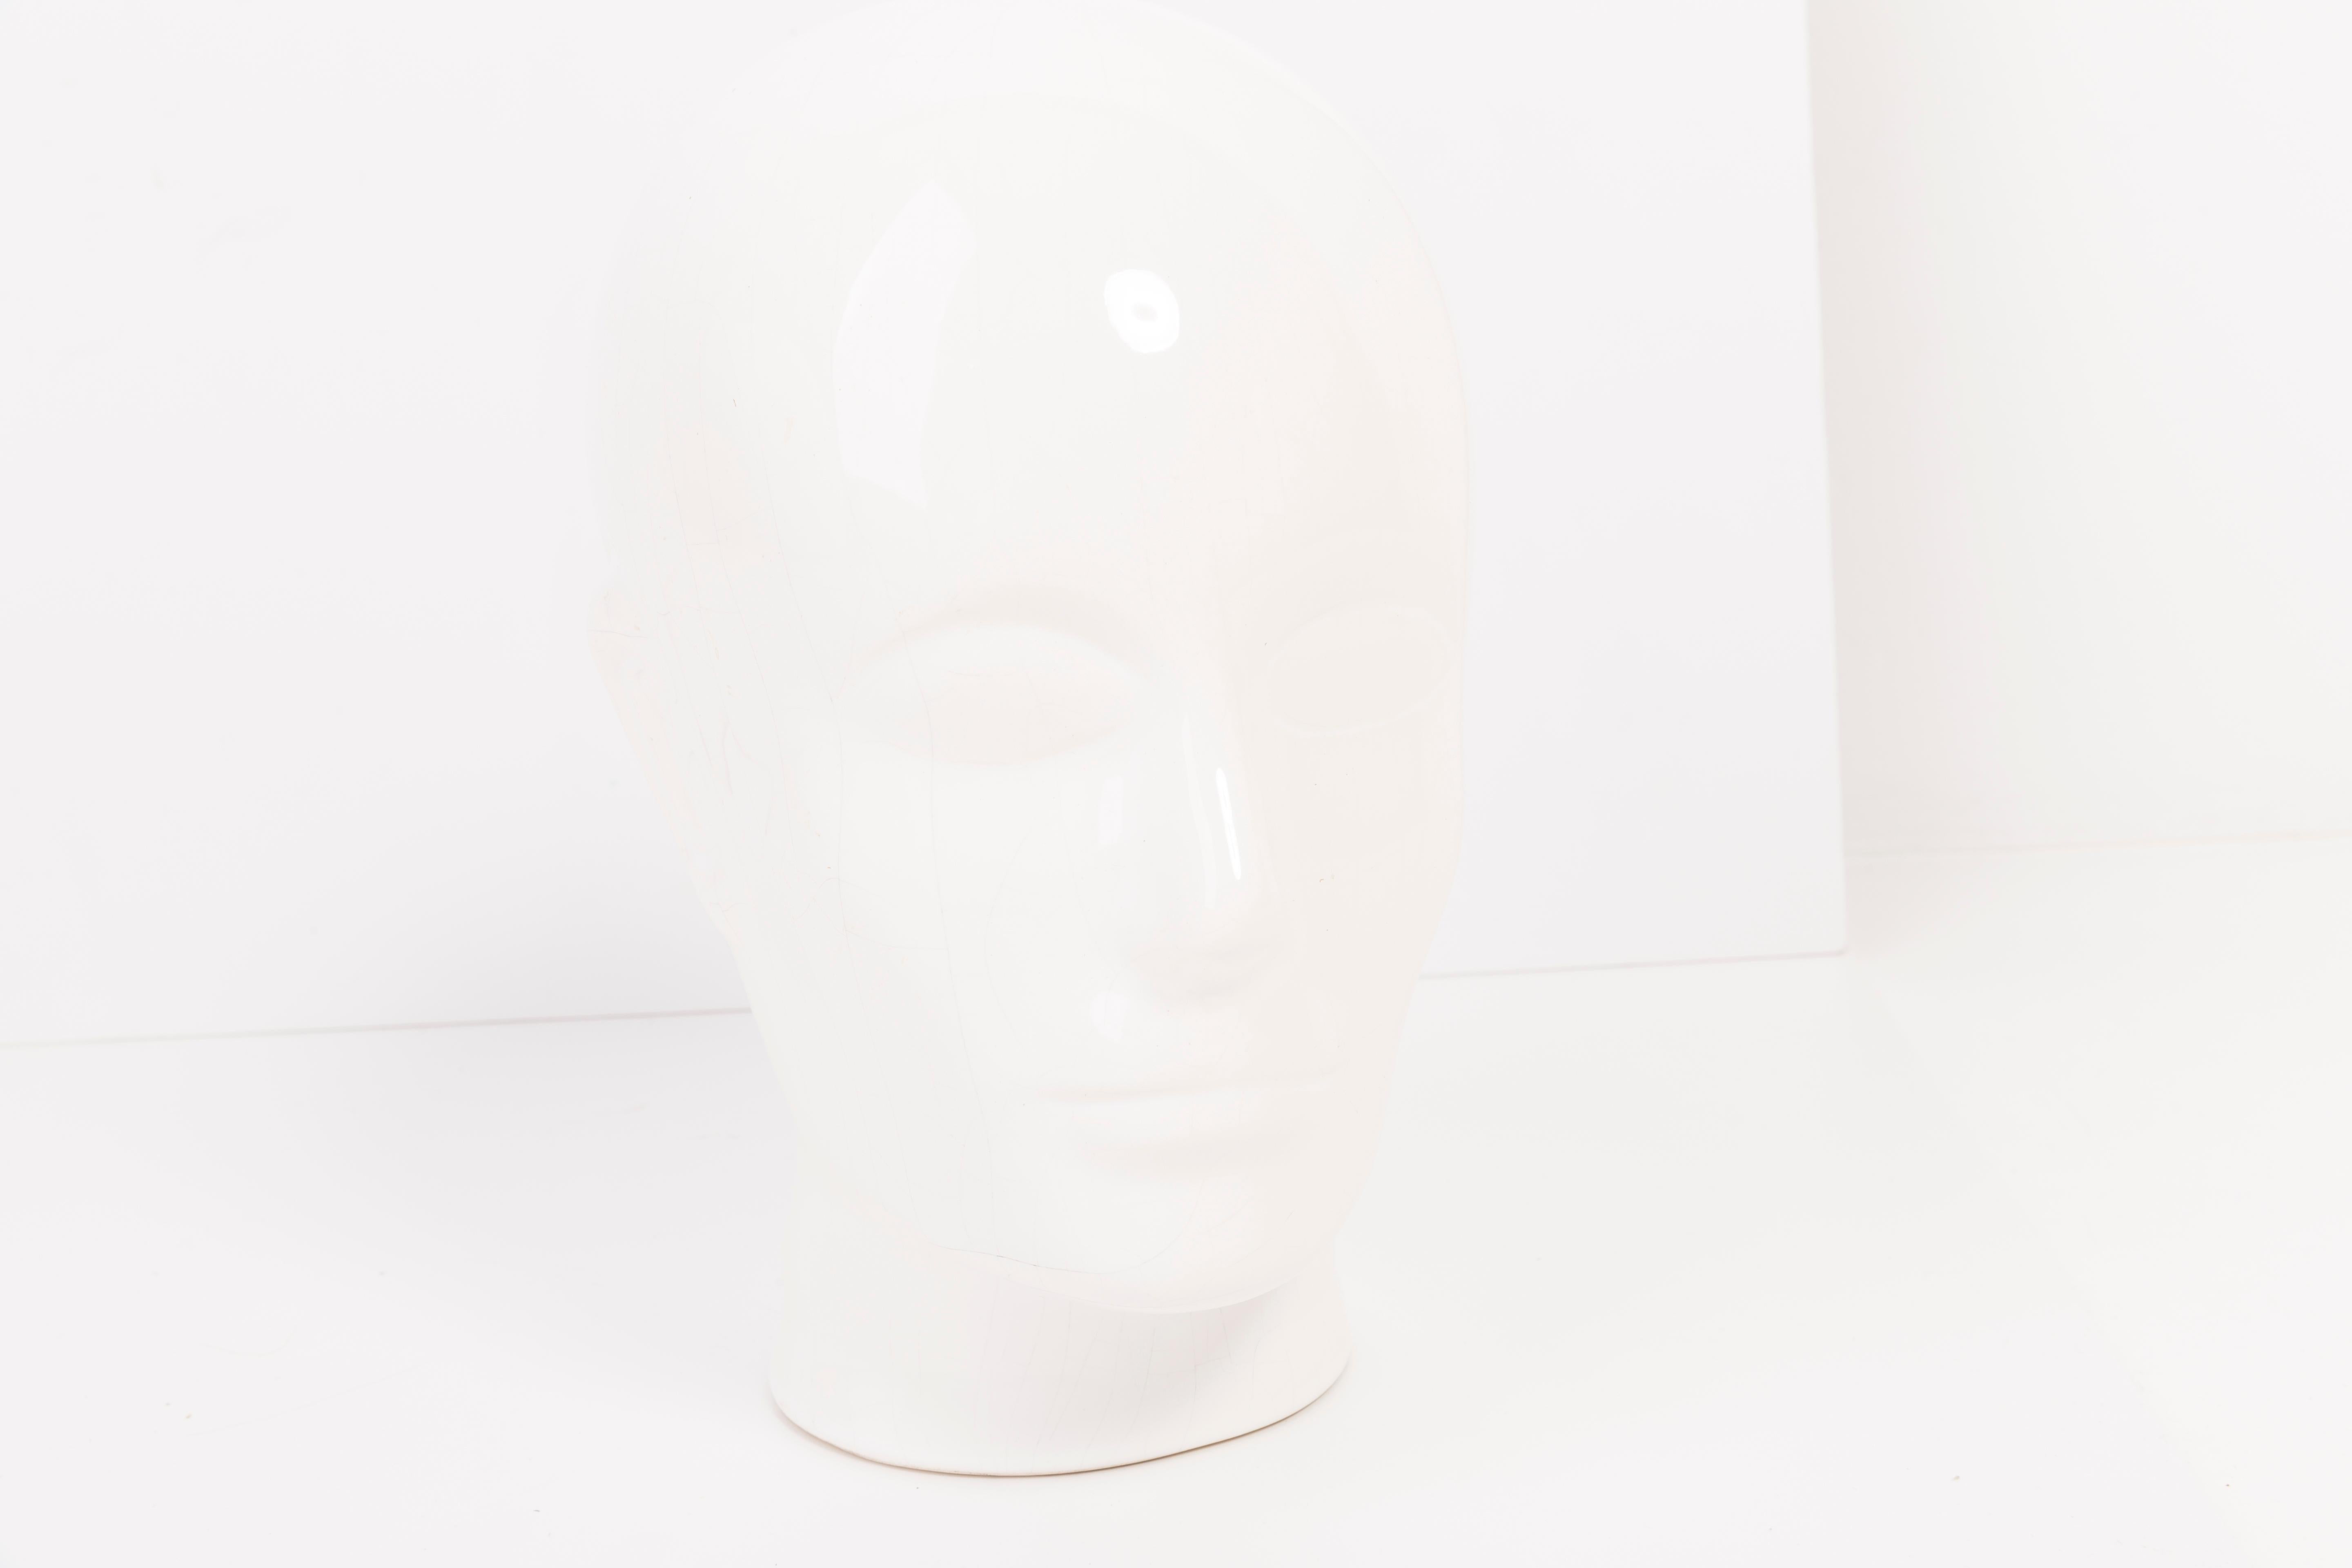 Life-size porcelain head in a white color. Produced in a German steelworks in the 1970s. Original good vintage condition. A perfect addition to the interior, photo prop, display or headphone stand.